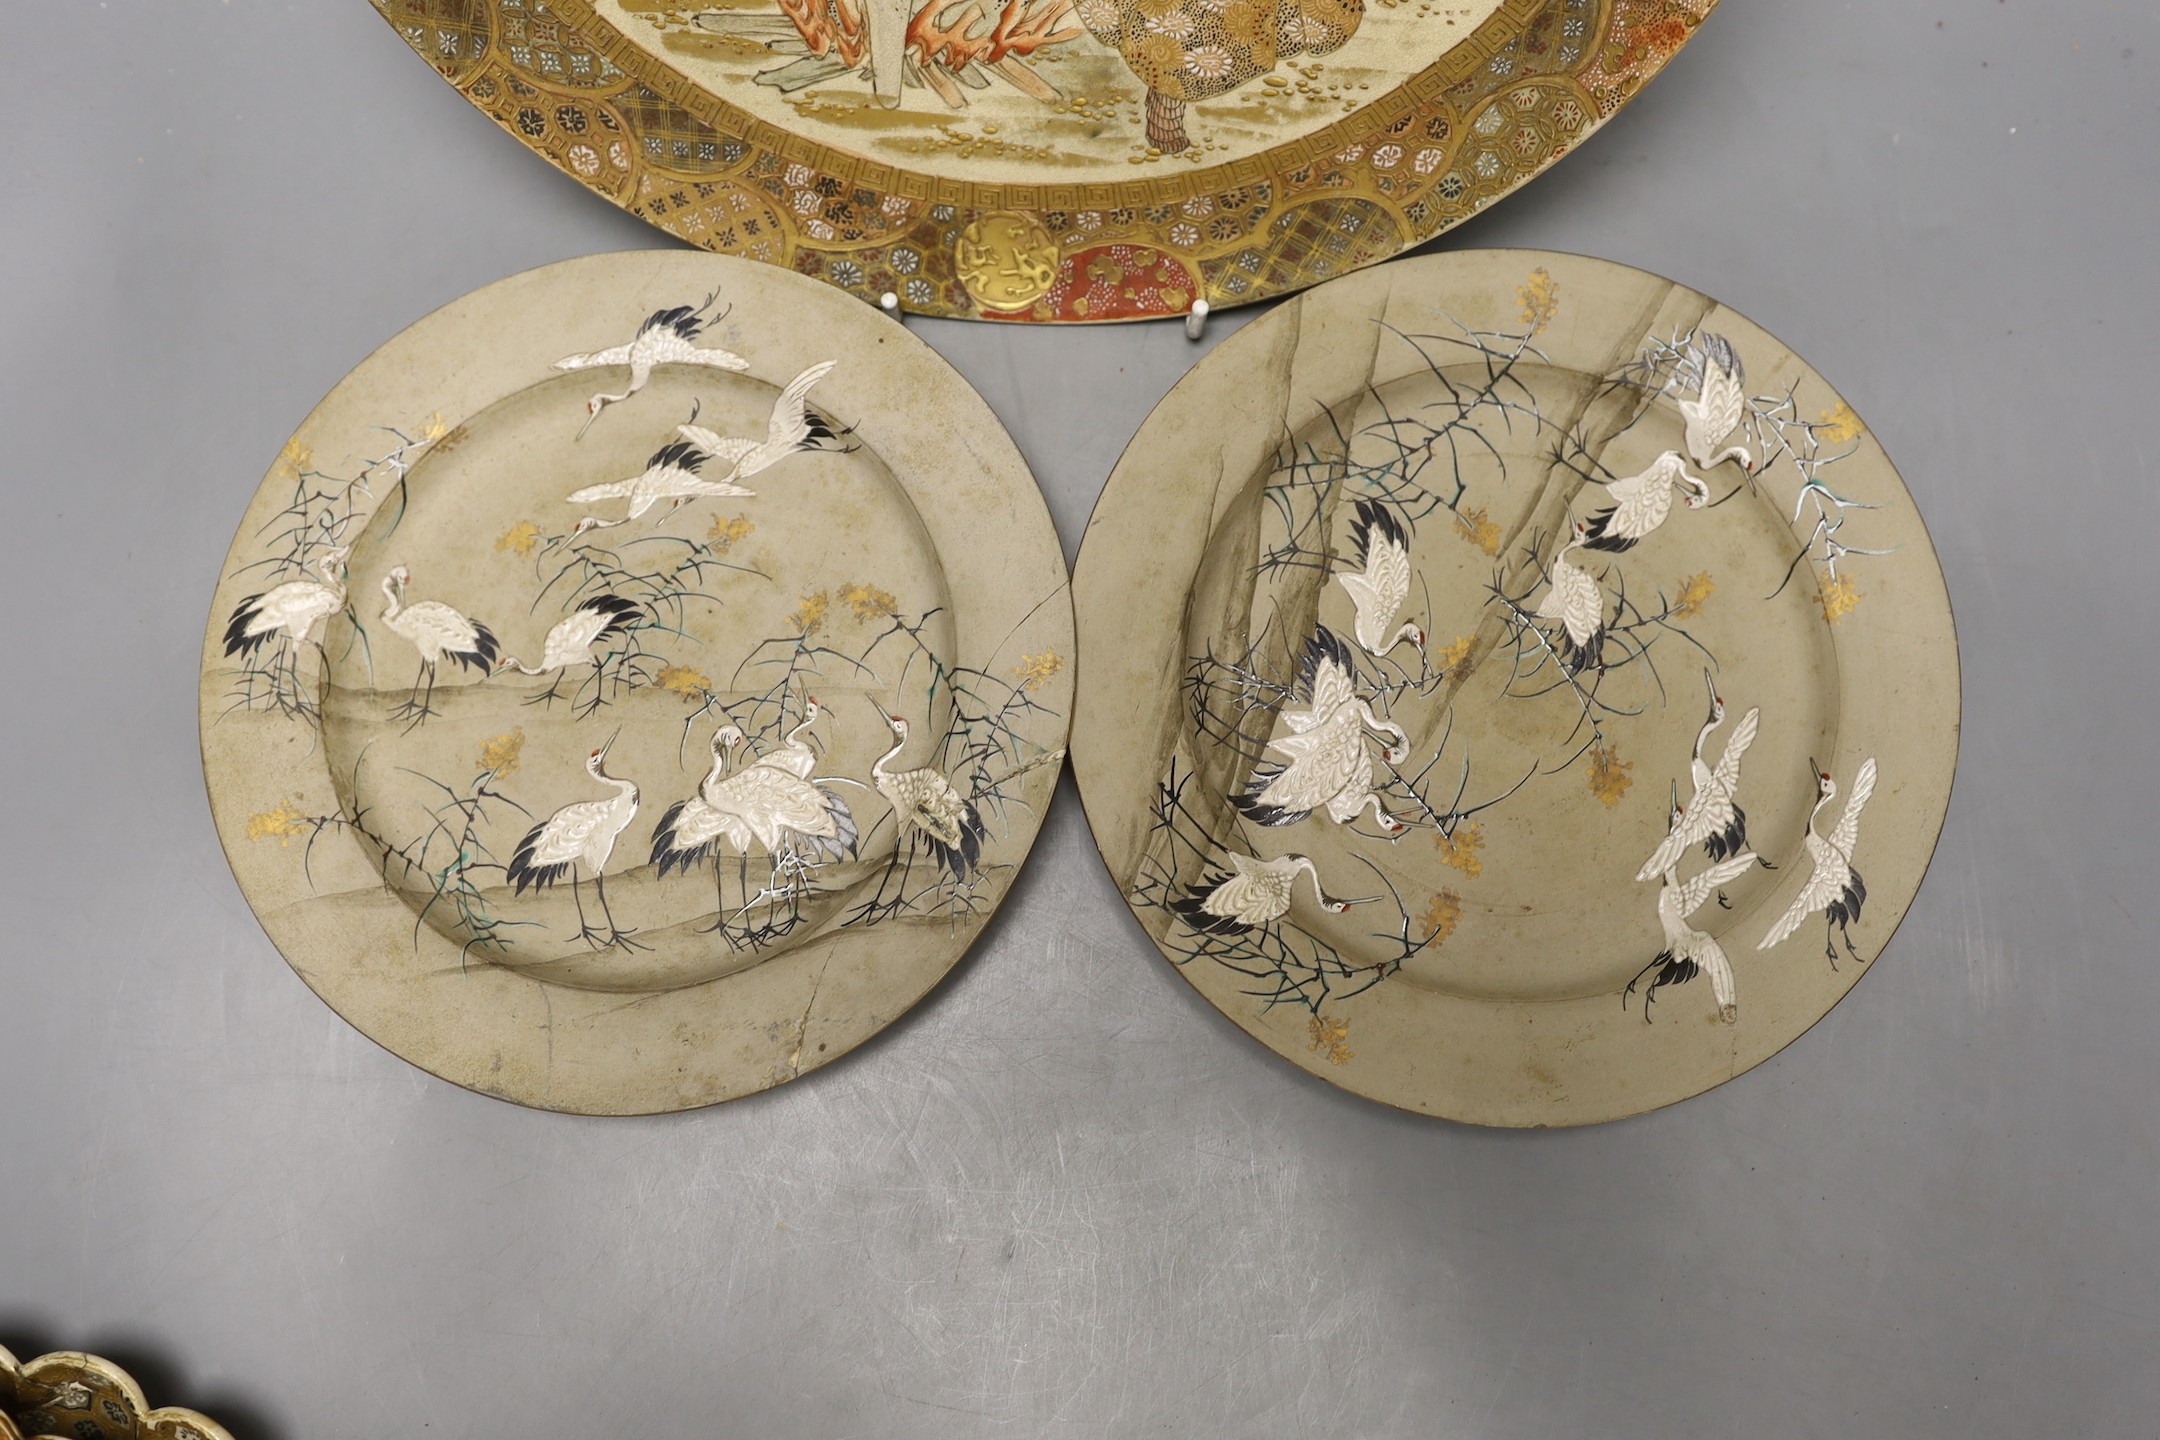 Three Japanese Satsuma dishes and a pair of plates - largest 31cm diameter